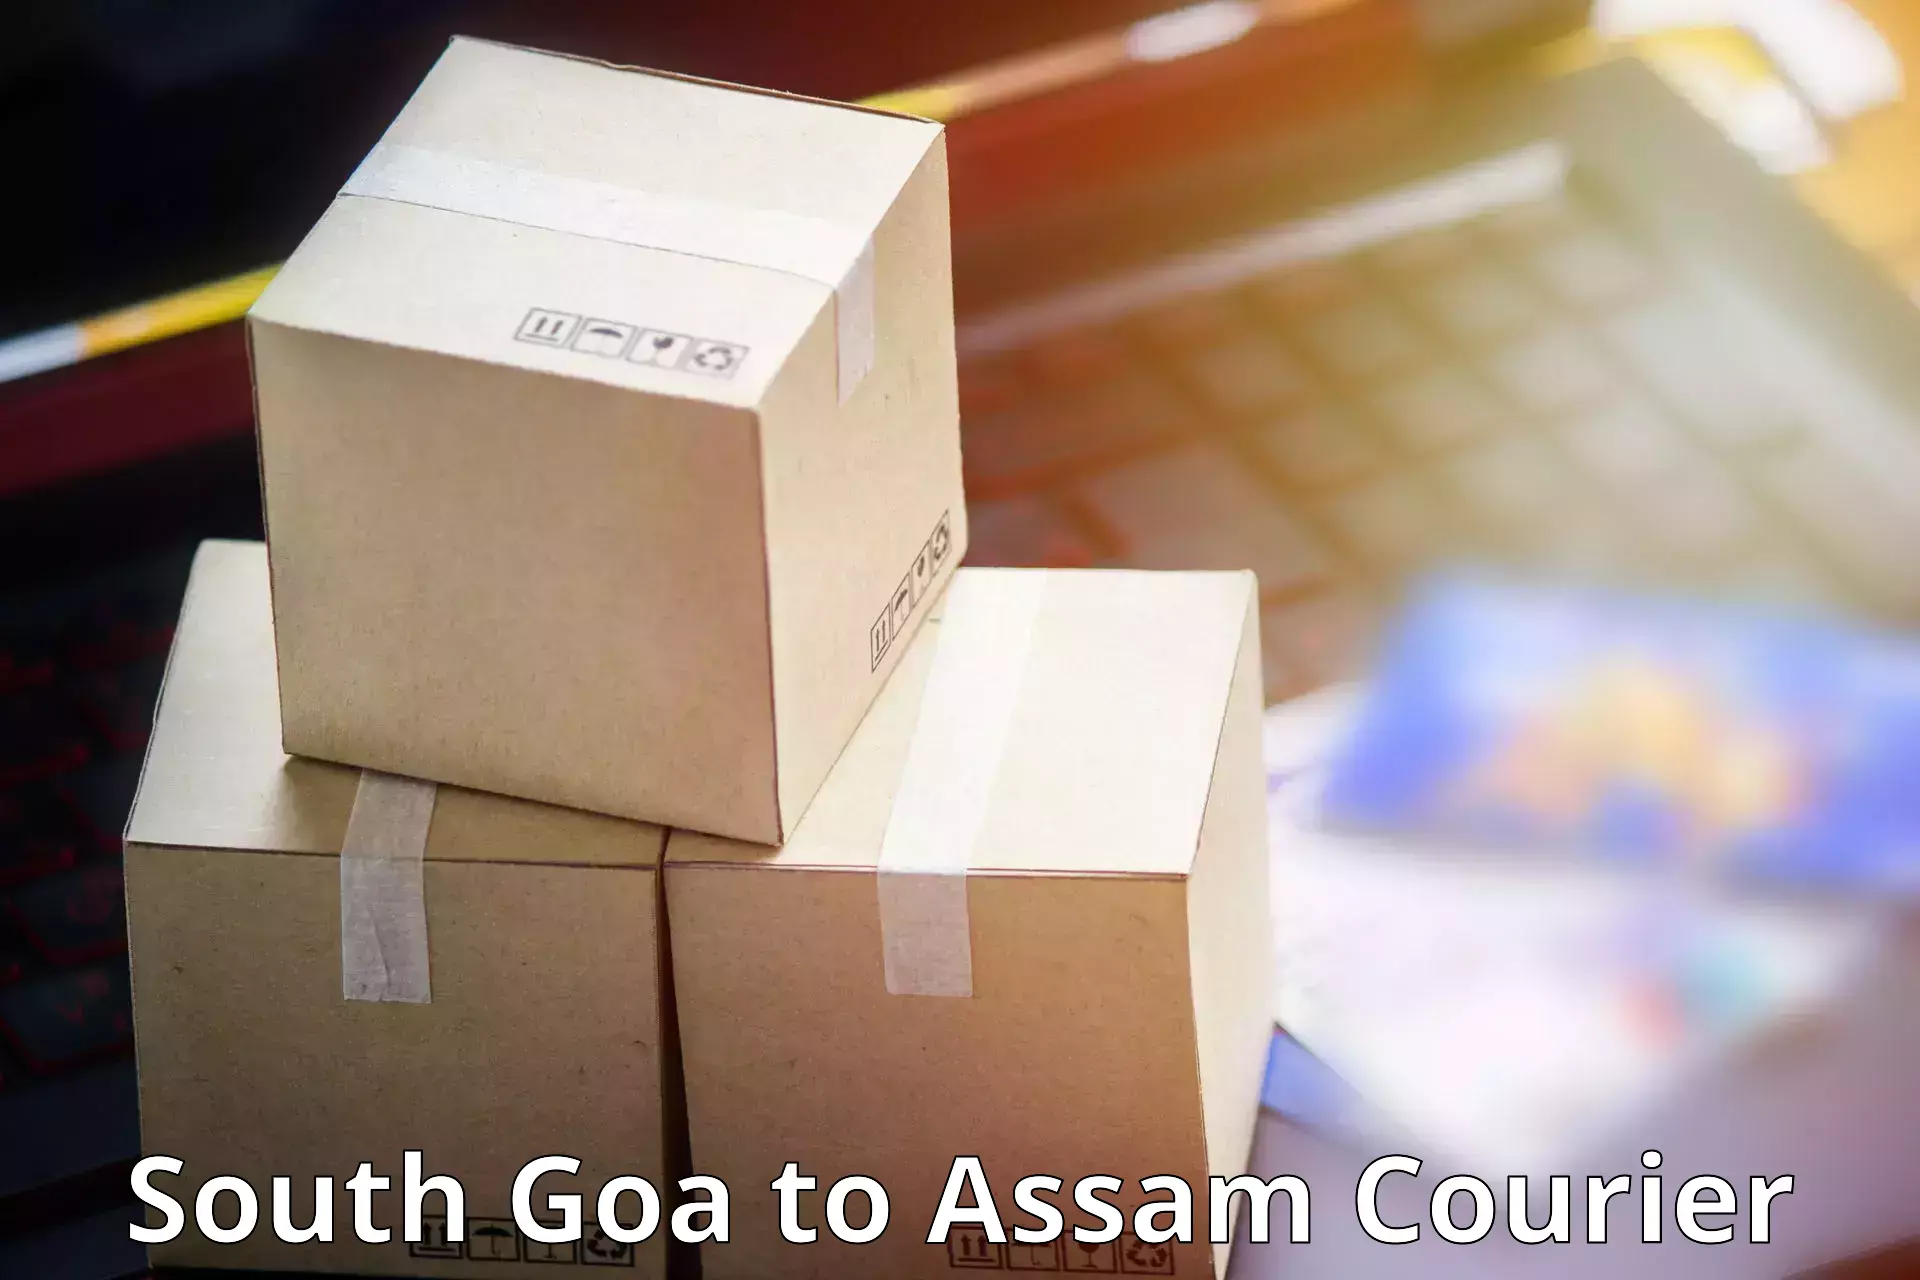 Global courier networks South Goa to Dergaon